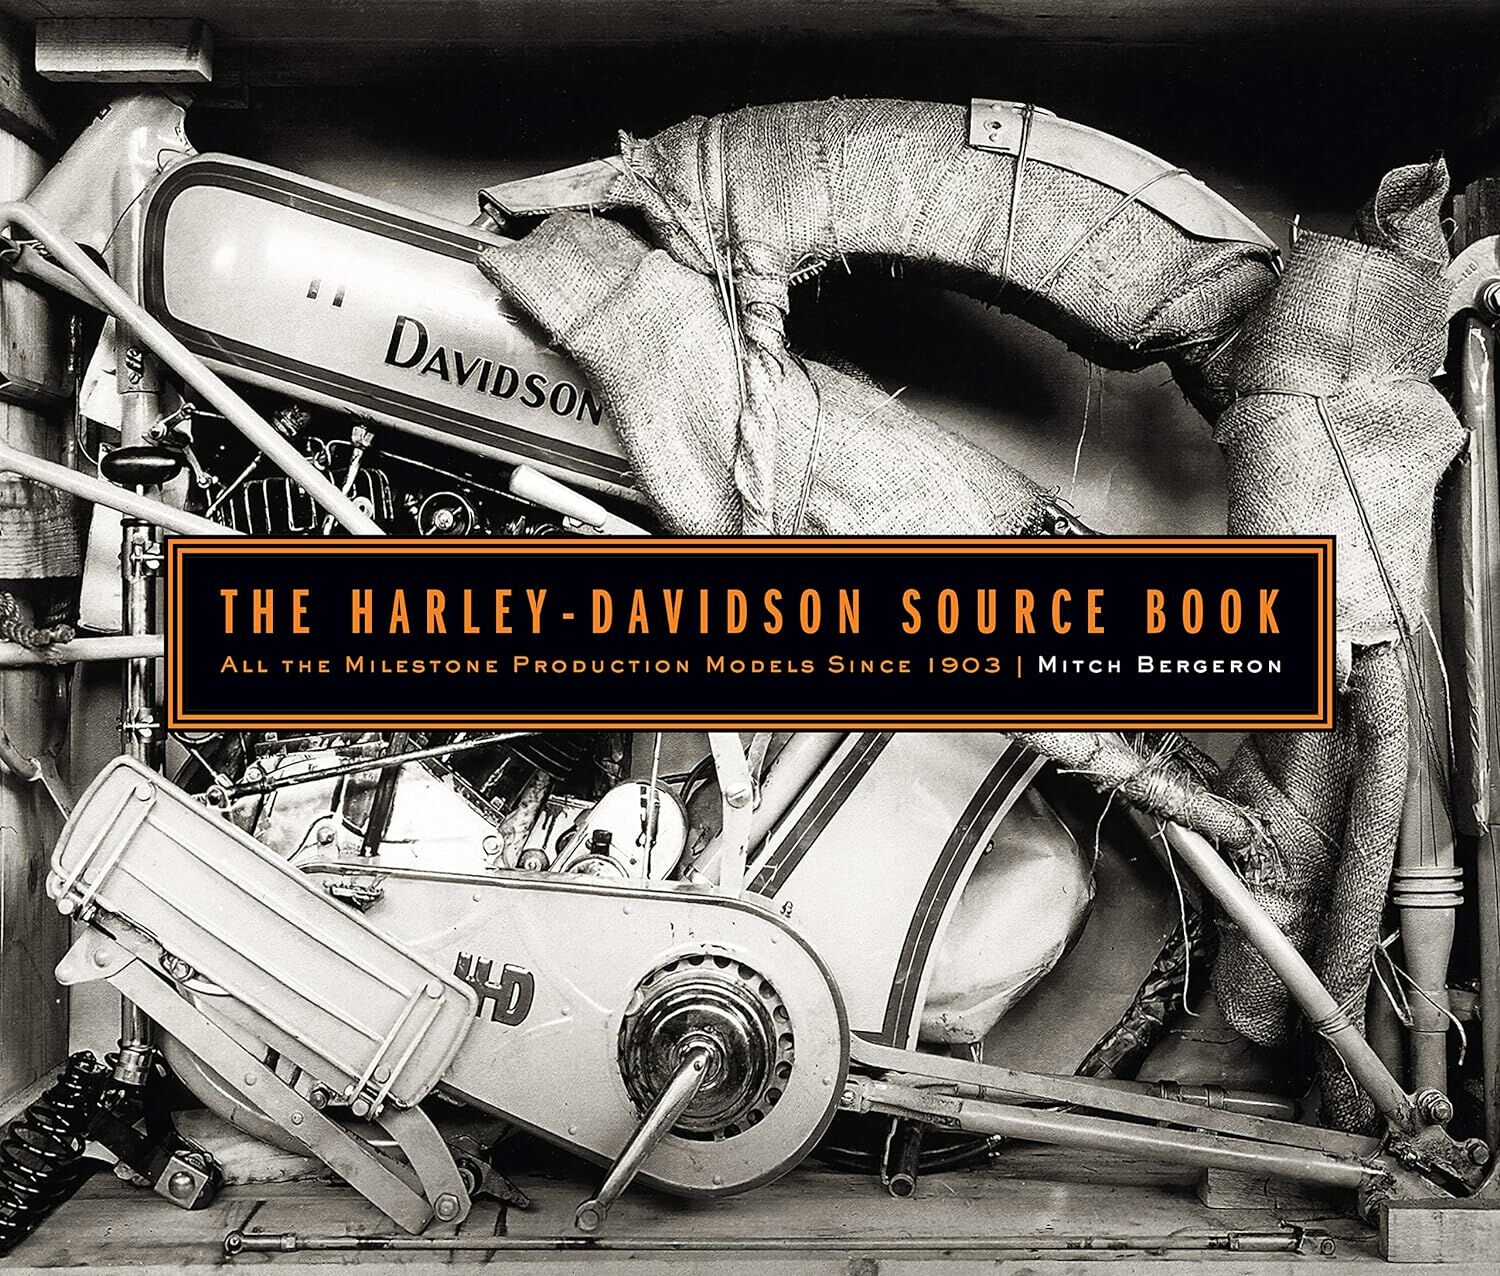 The Harley-Davidson Source Book: All the Milestone Production Models Since 1903